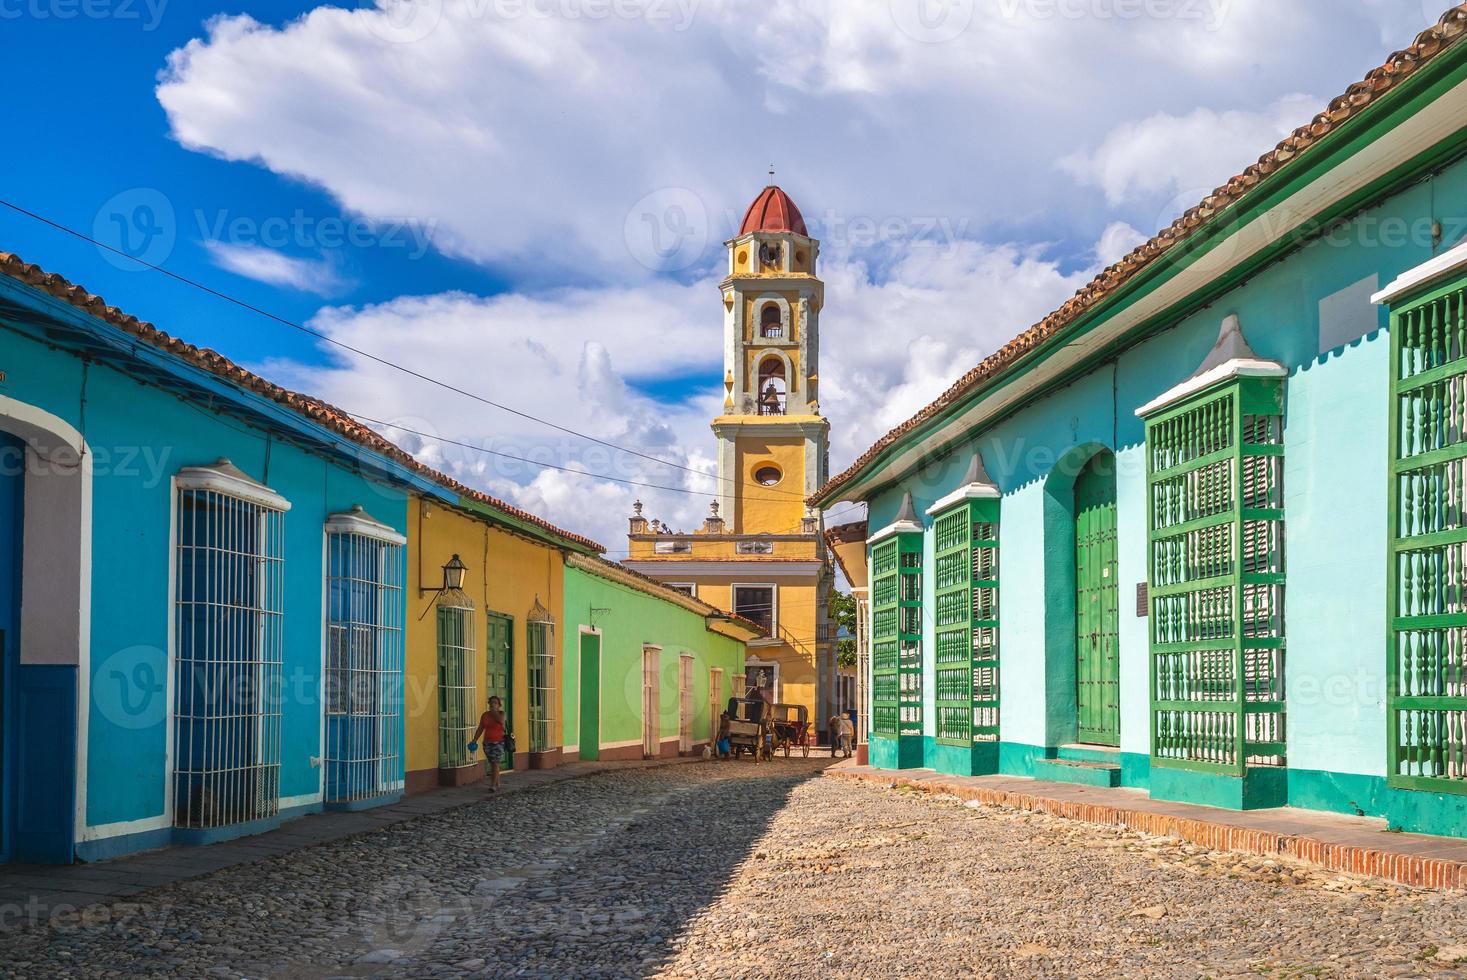 Street view and Bell tower of Trinidad, Cuba photo